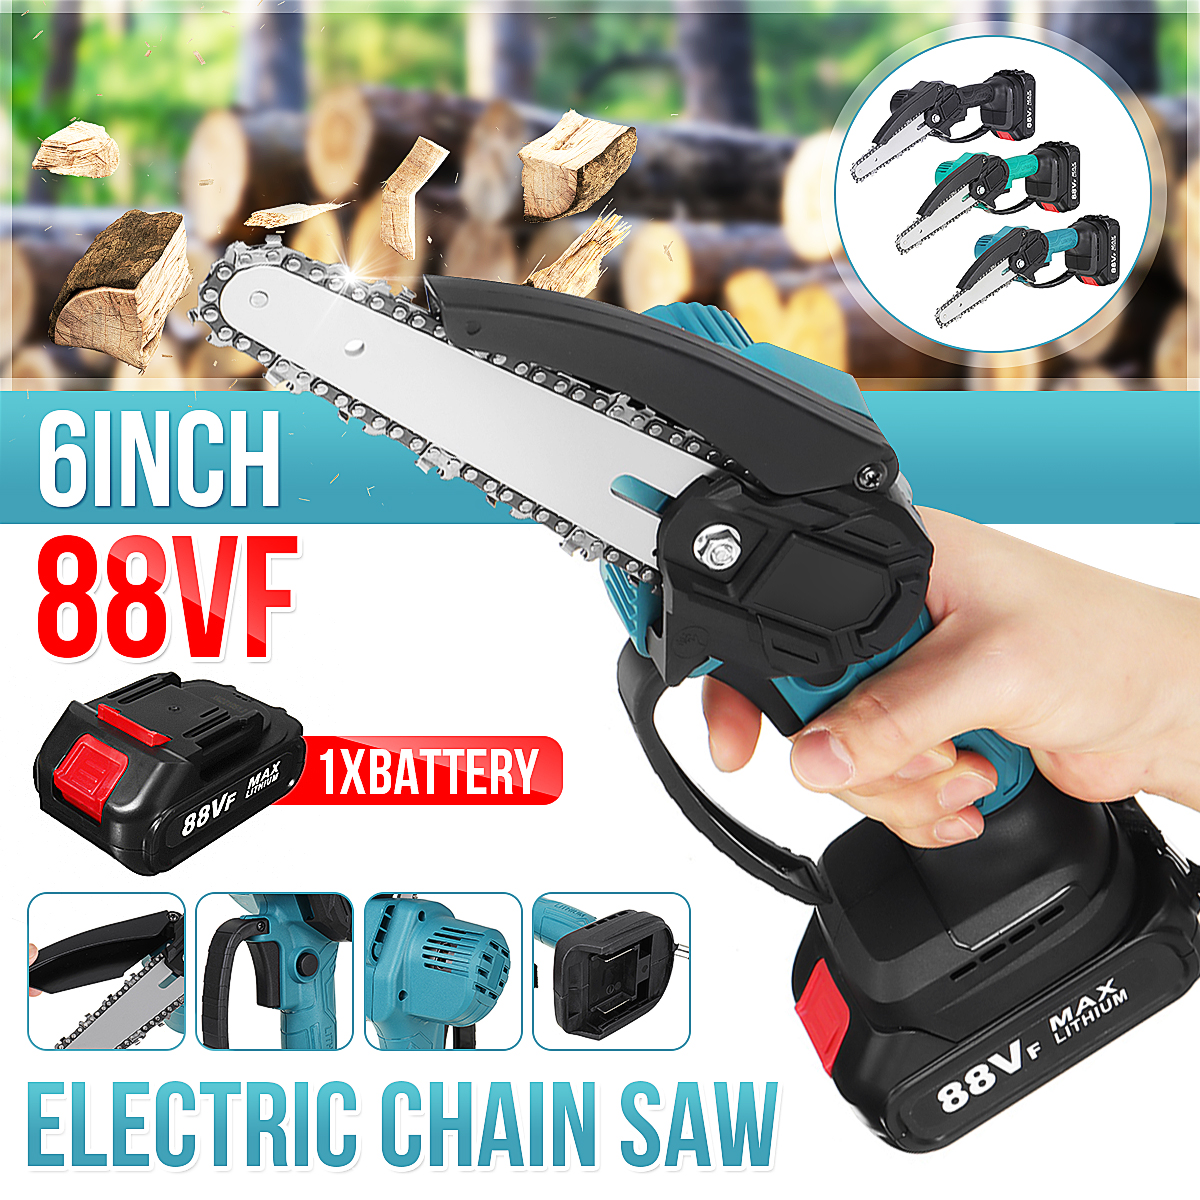 88VF-Electric-Saw-Cordless-6-Inch-One-Hand-Chain-Saws-Woodworking-Cutting-Tool-W-1-Battery-1855400-2